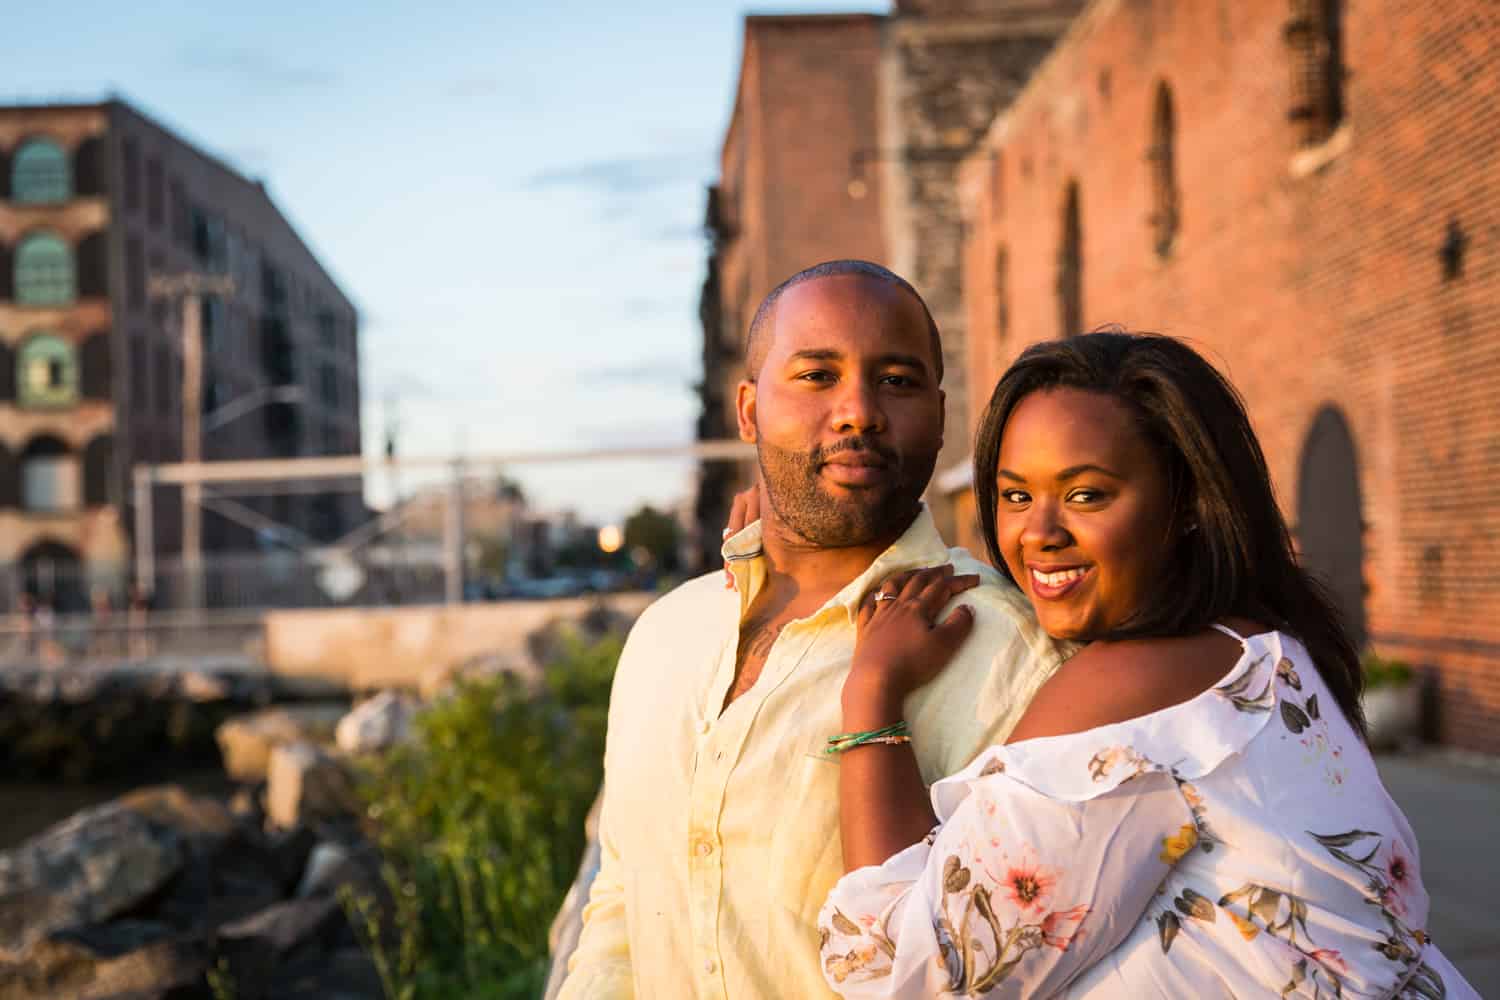 Couple in front of brick building in Red Hook for an article on creative engagement photo shoot ideas